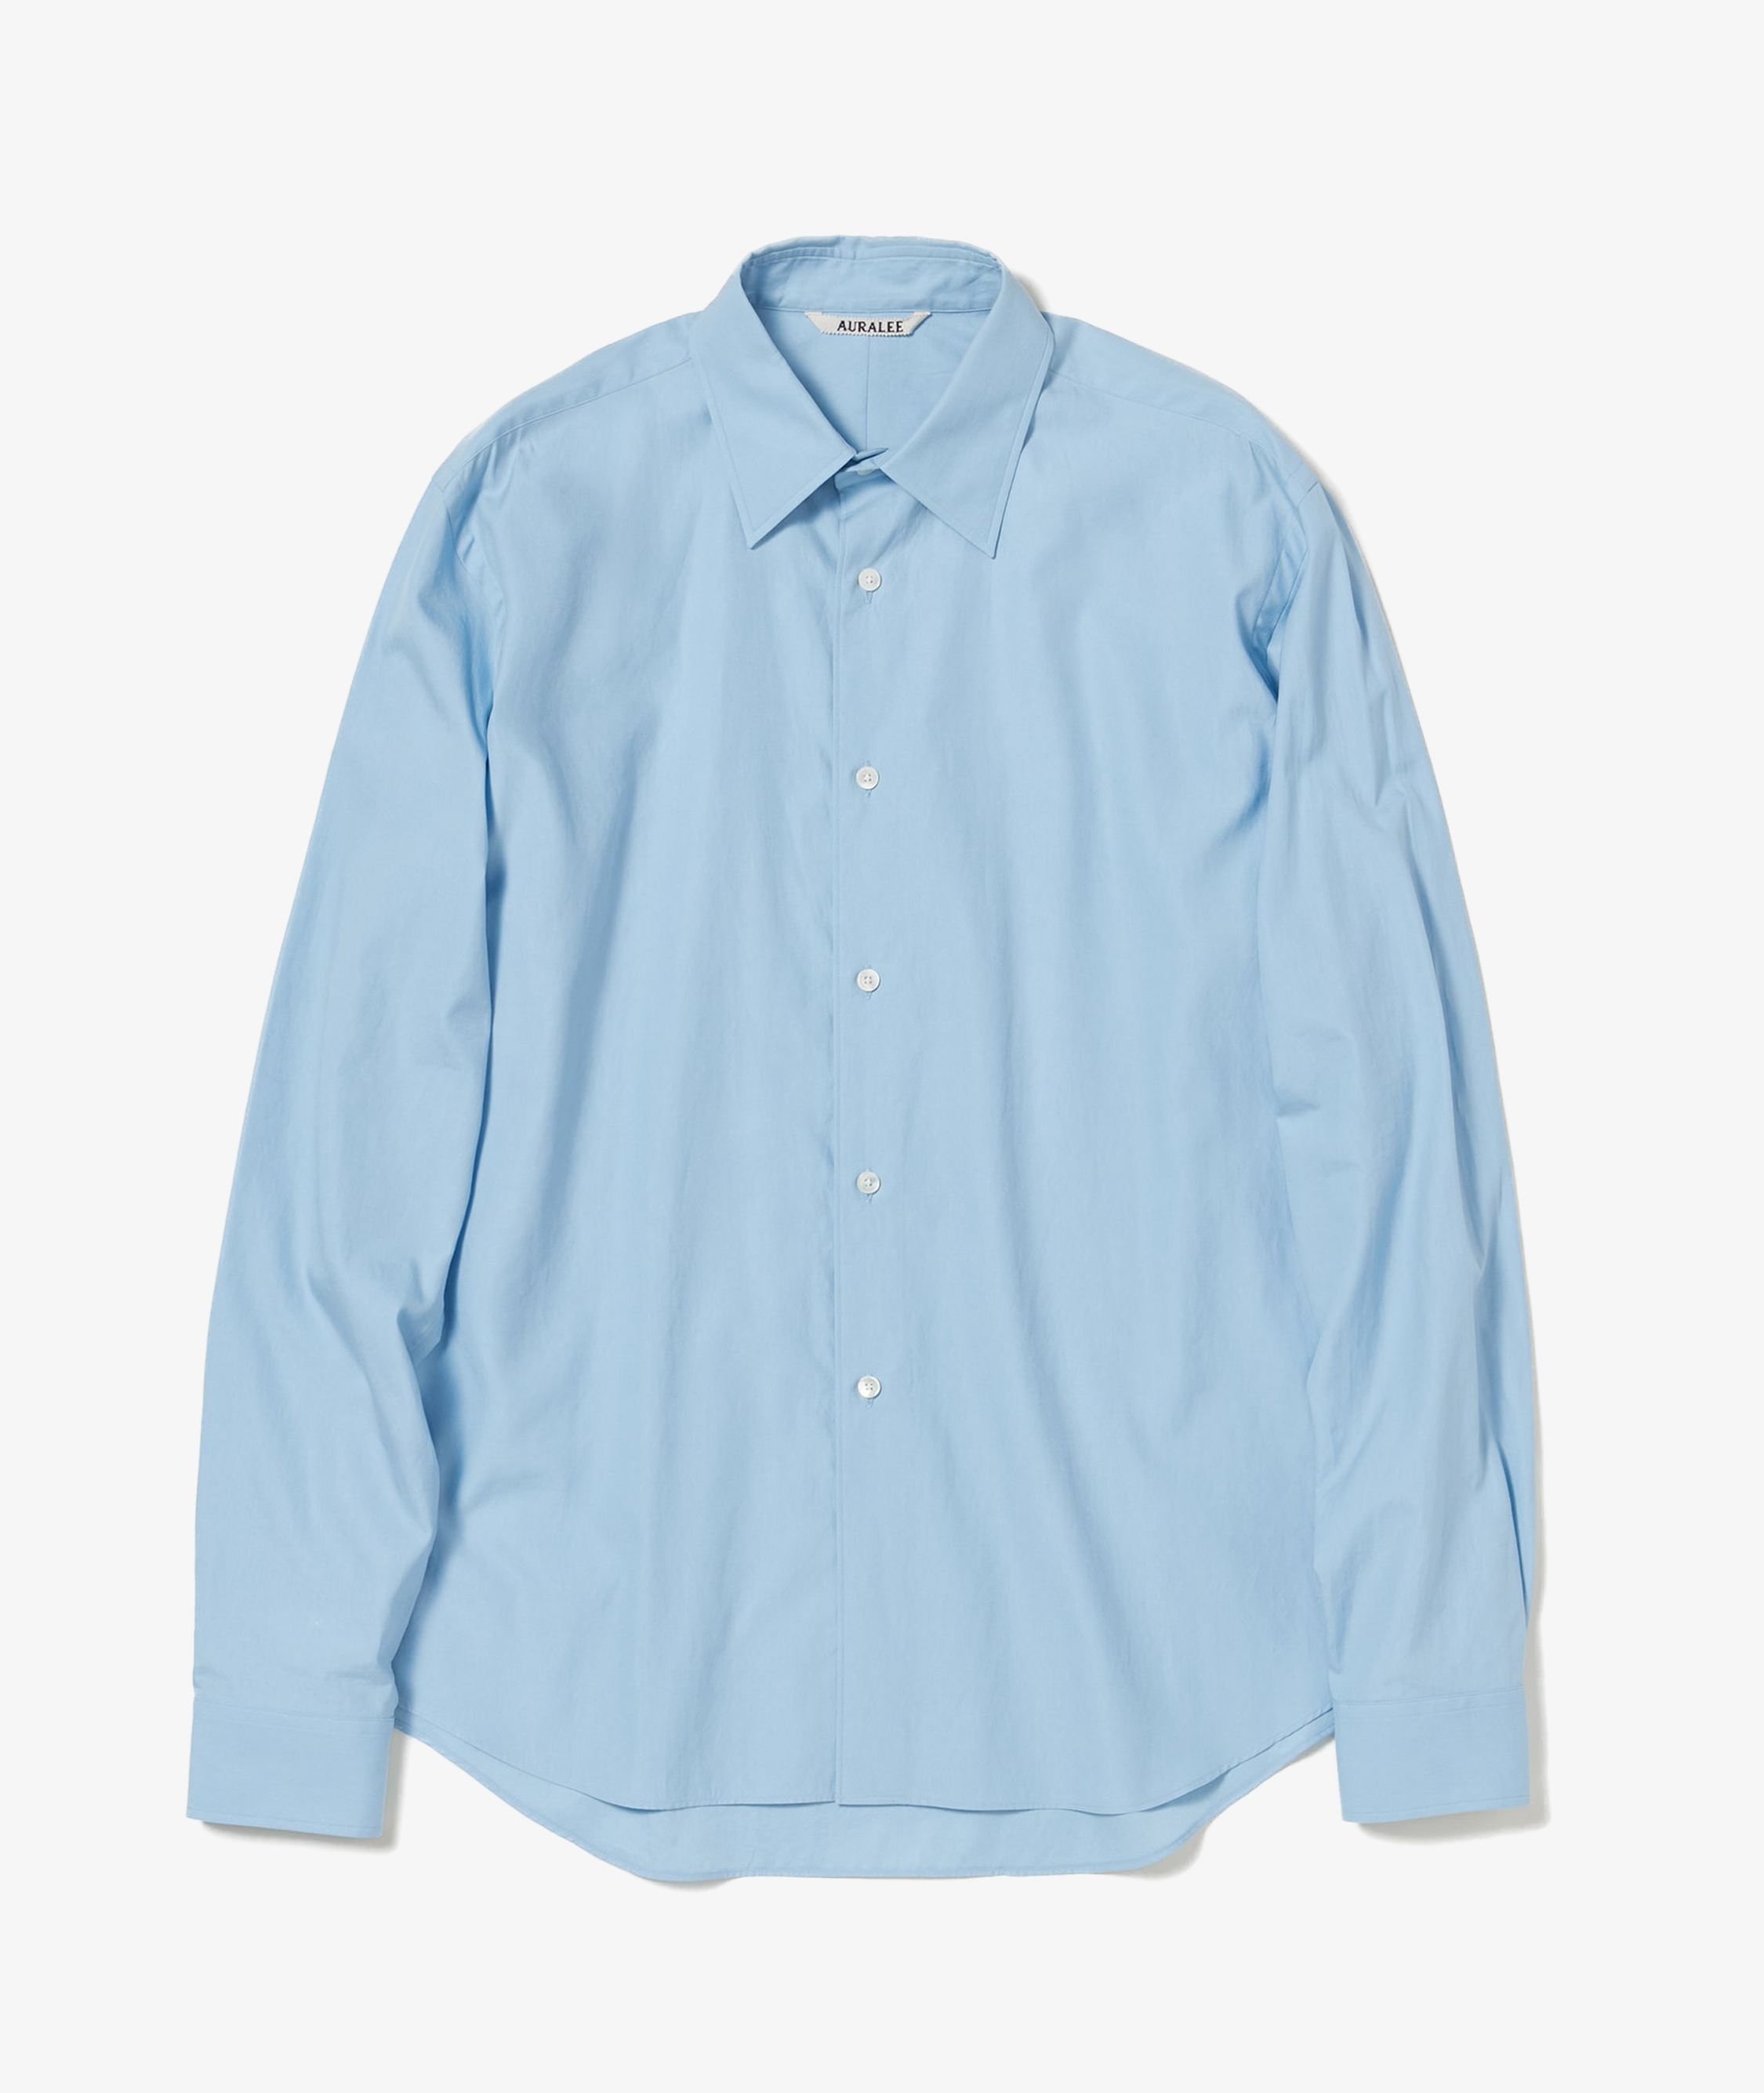 Norse Store | Shipping Worldwide - Auralee Washed Finx Twill Shirt 